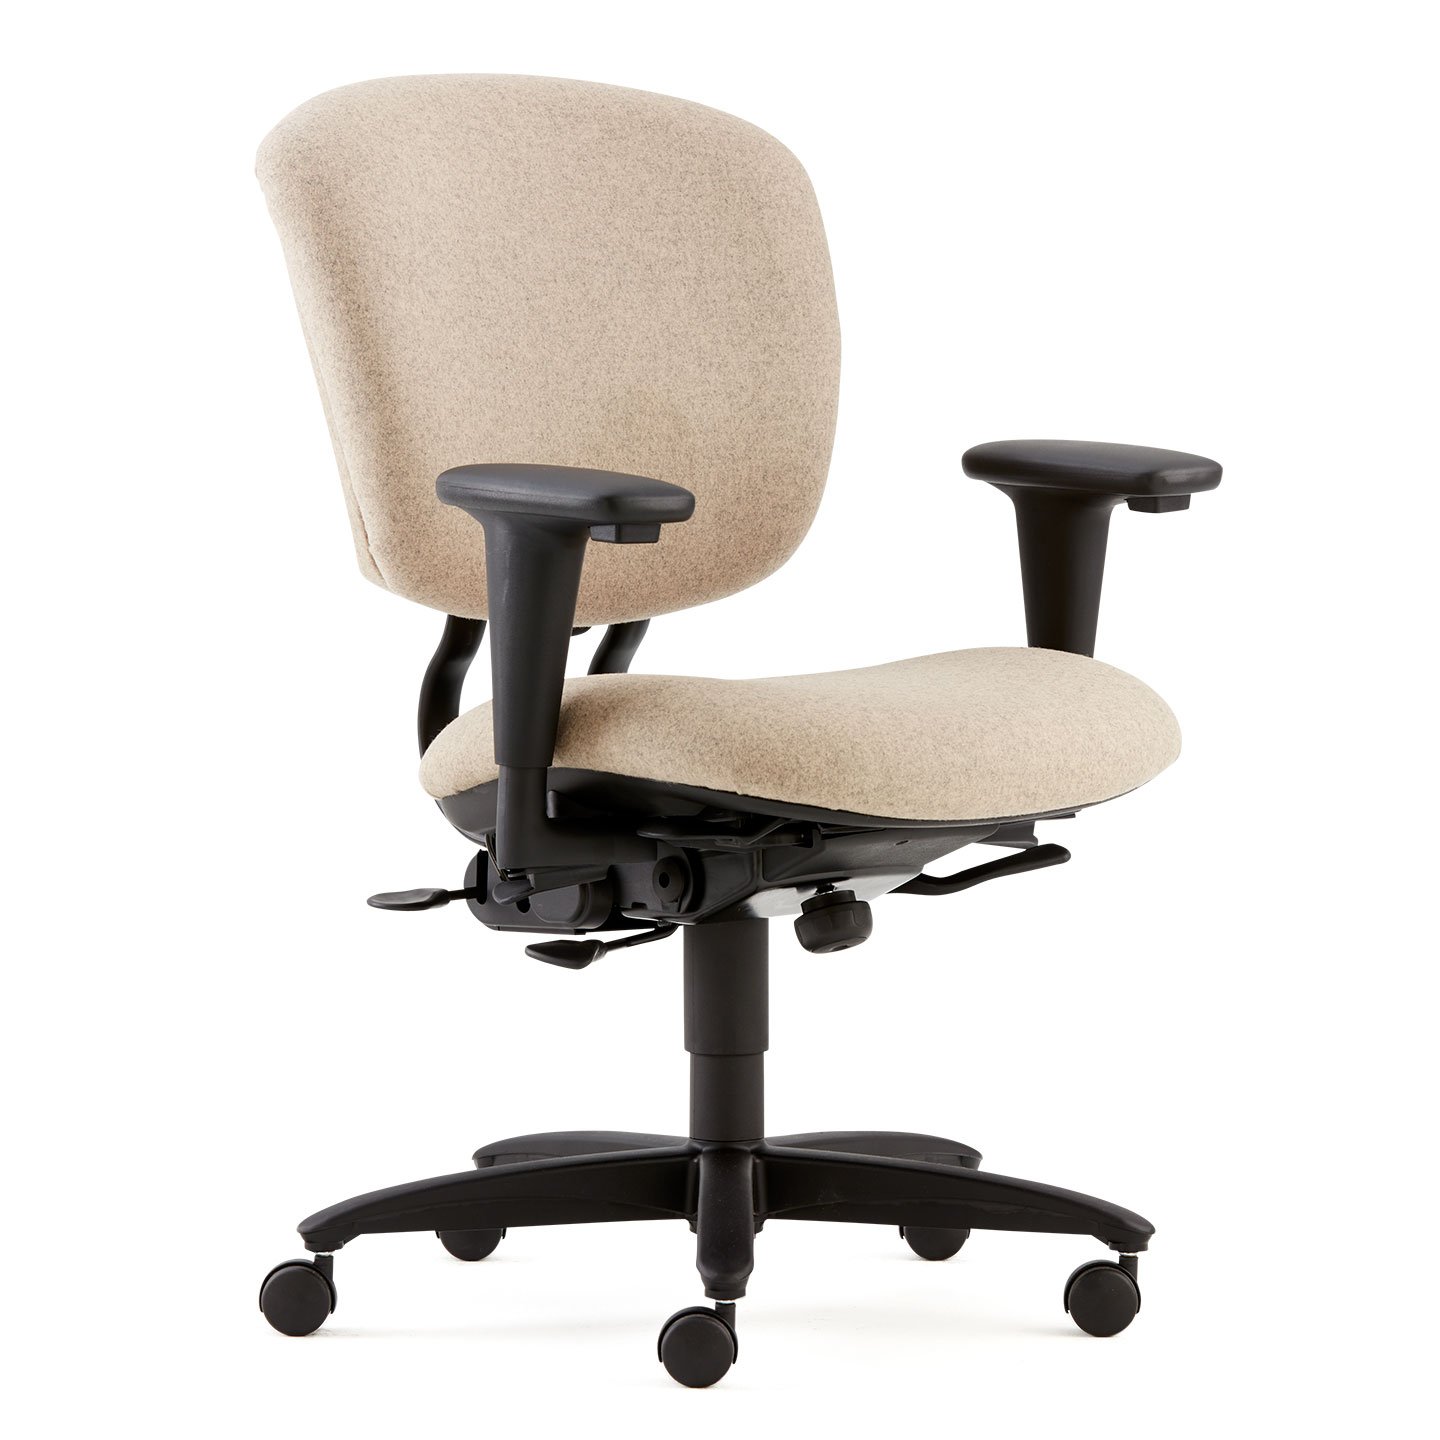 Haworth Improv H E Desk chair in beige upholstery at an angle